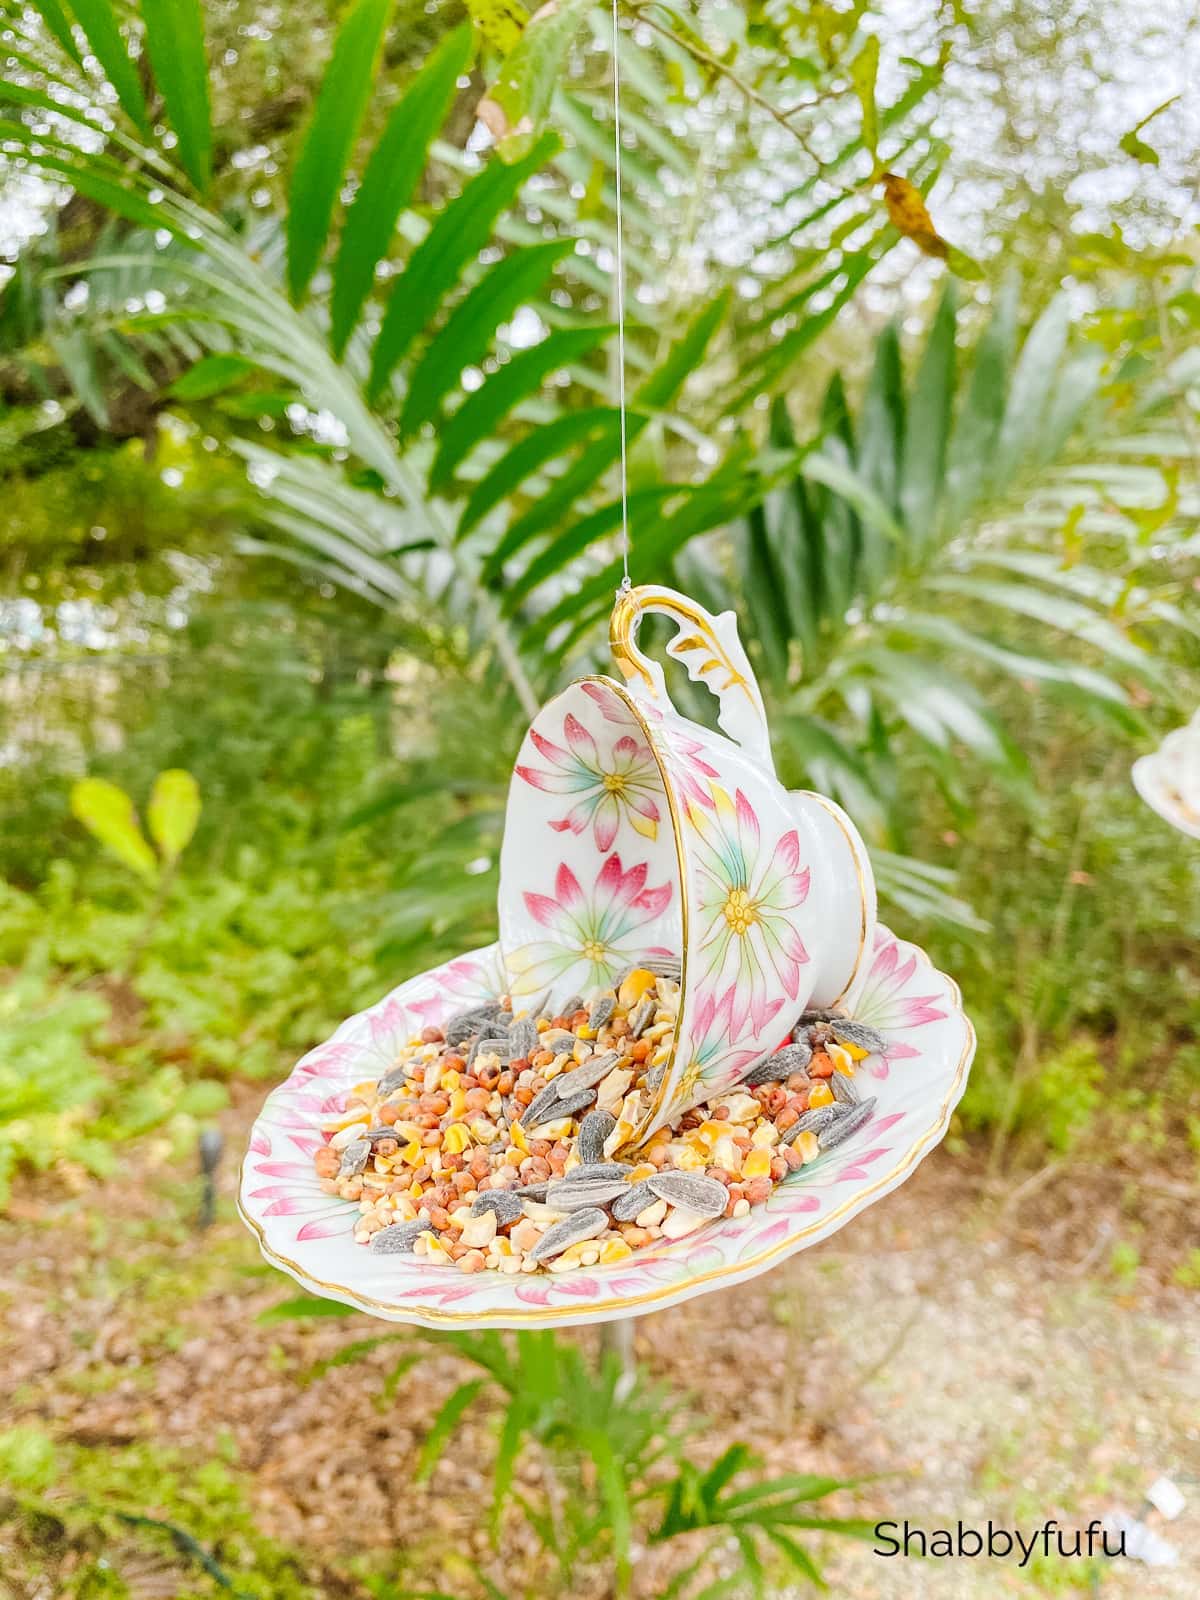 Use Those Spare Teacups In Your Garden & More! The Style Showcase 231